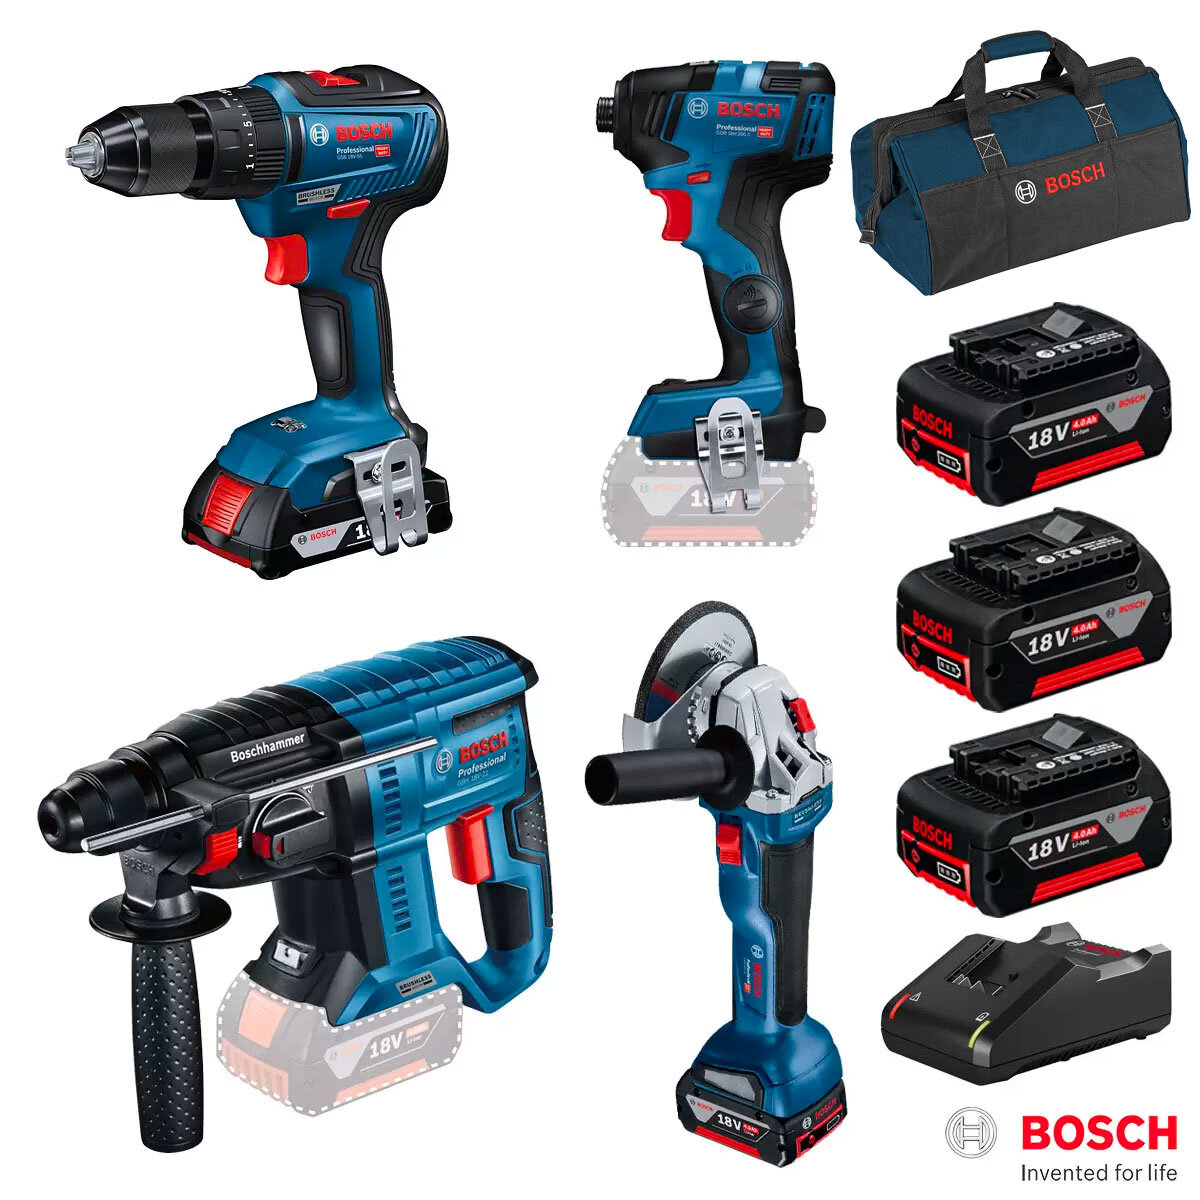 Bosch Professional 4 Piece Power Tool Kit with 3 x 4.0Ah